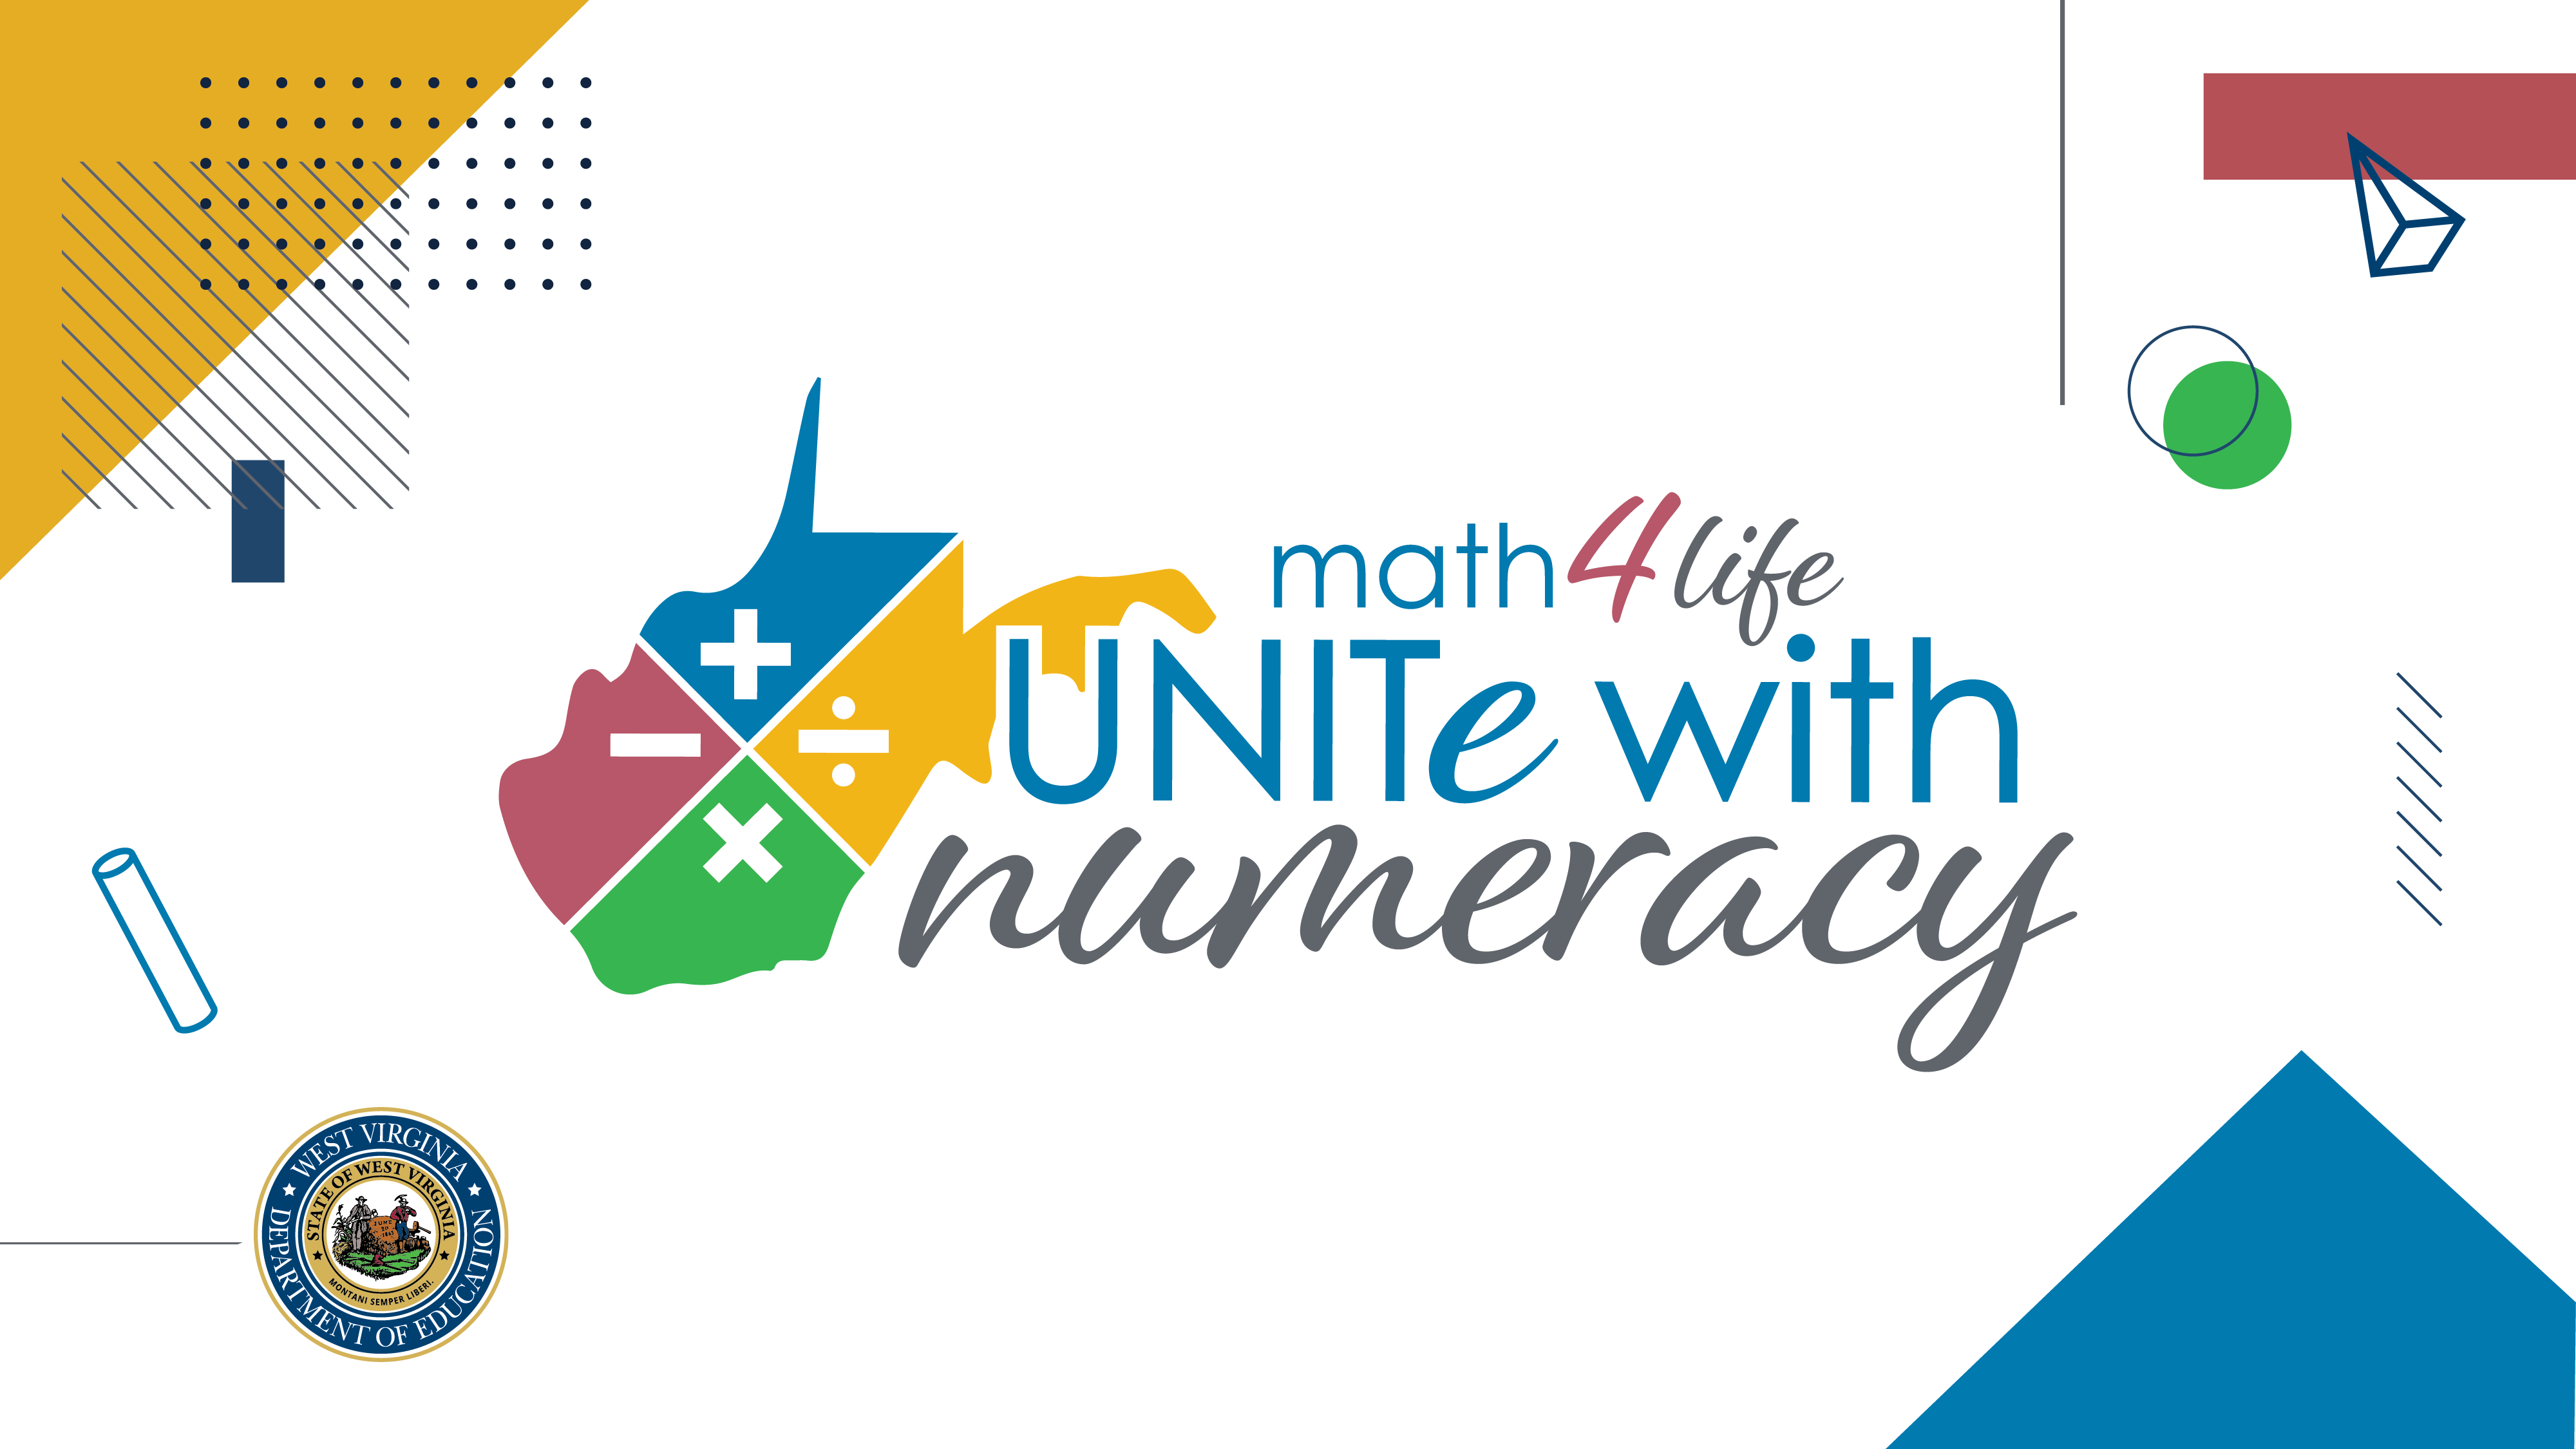 Graphic with the words "Math4Life, Unite with Numeracy" on it.